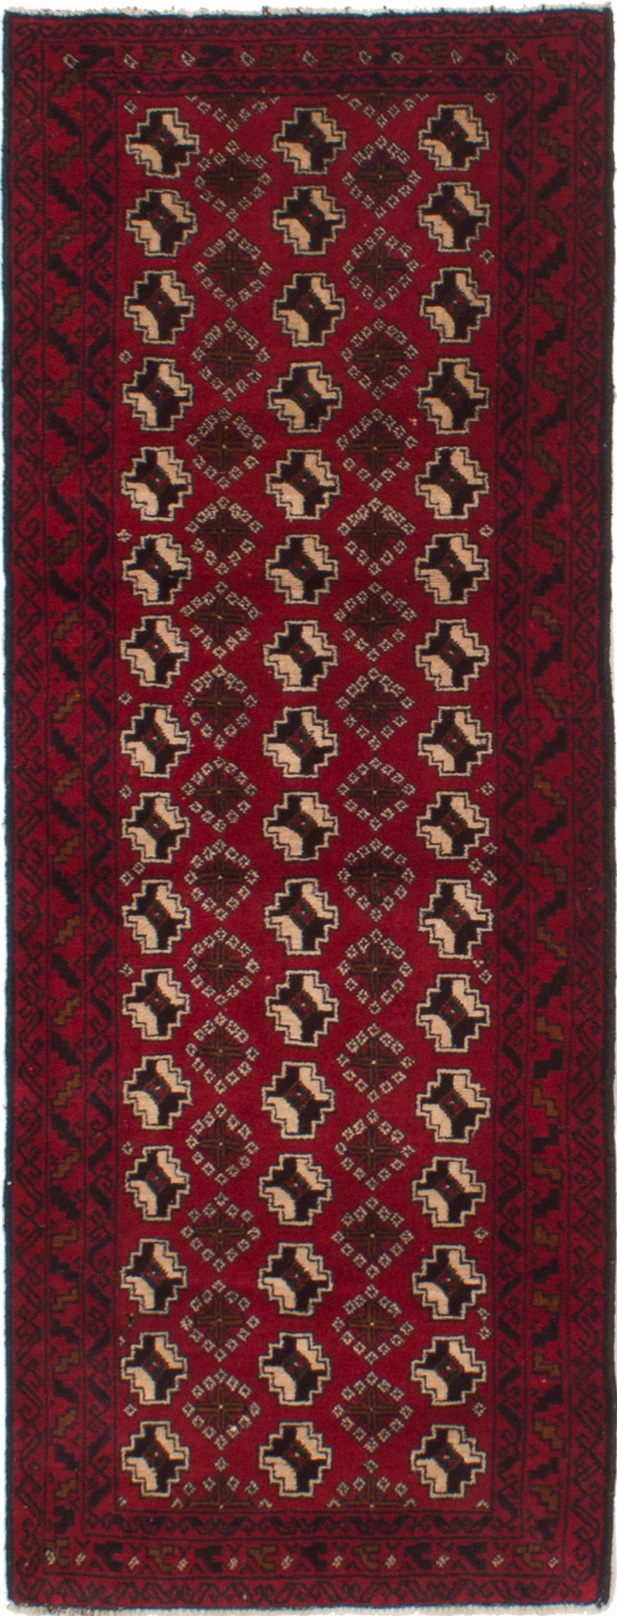 Hand-knotted Royal Baluch Red Wool Rug 2'5" x 6'5" Size: 2'5" x 6'5"  